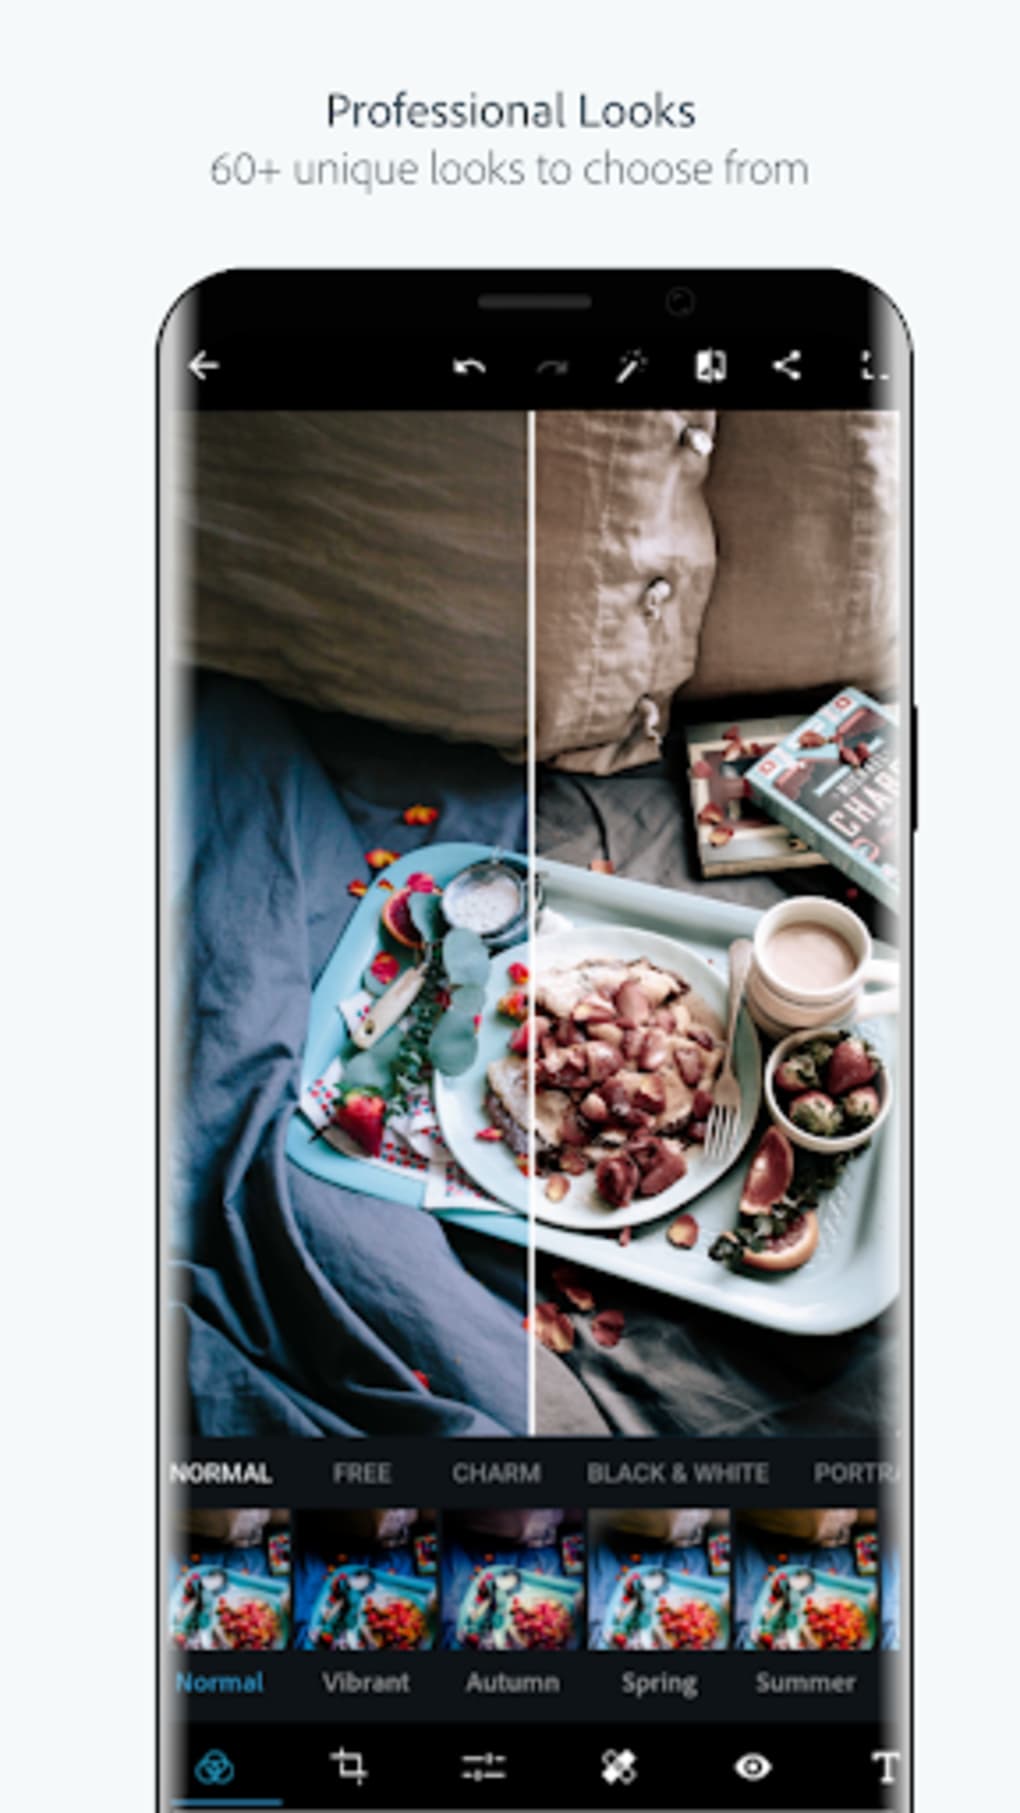 adobe photoshop express download for android